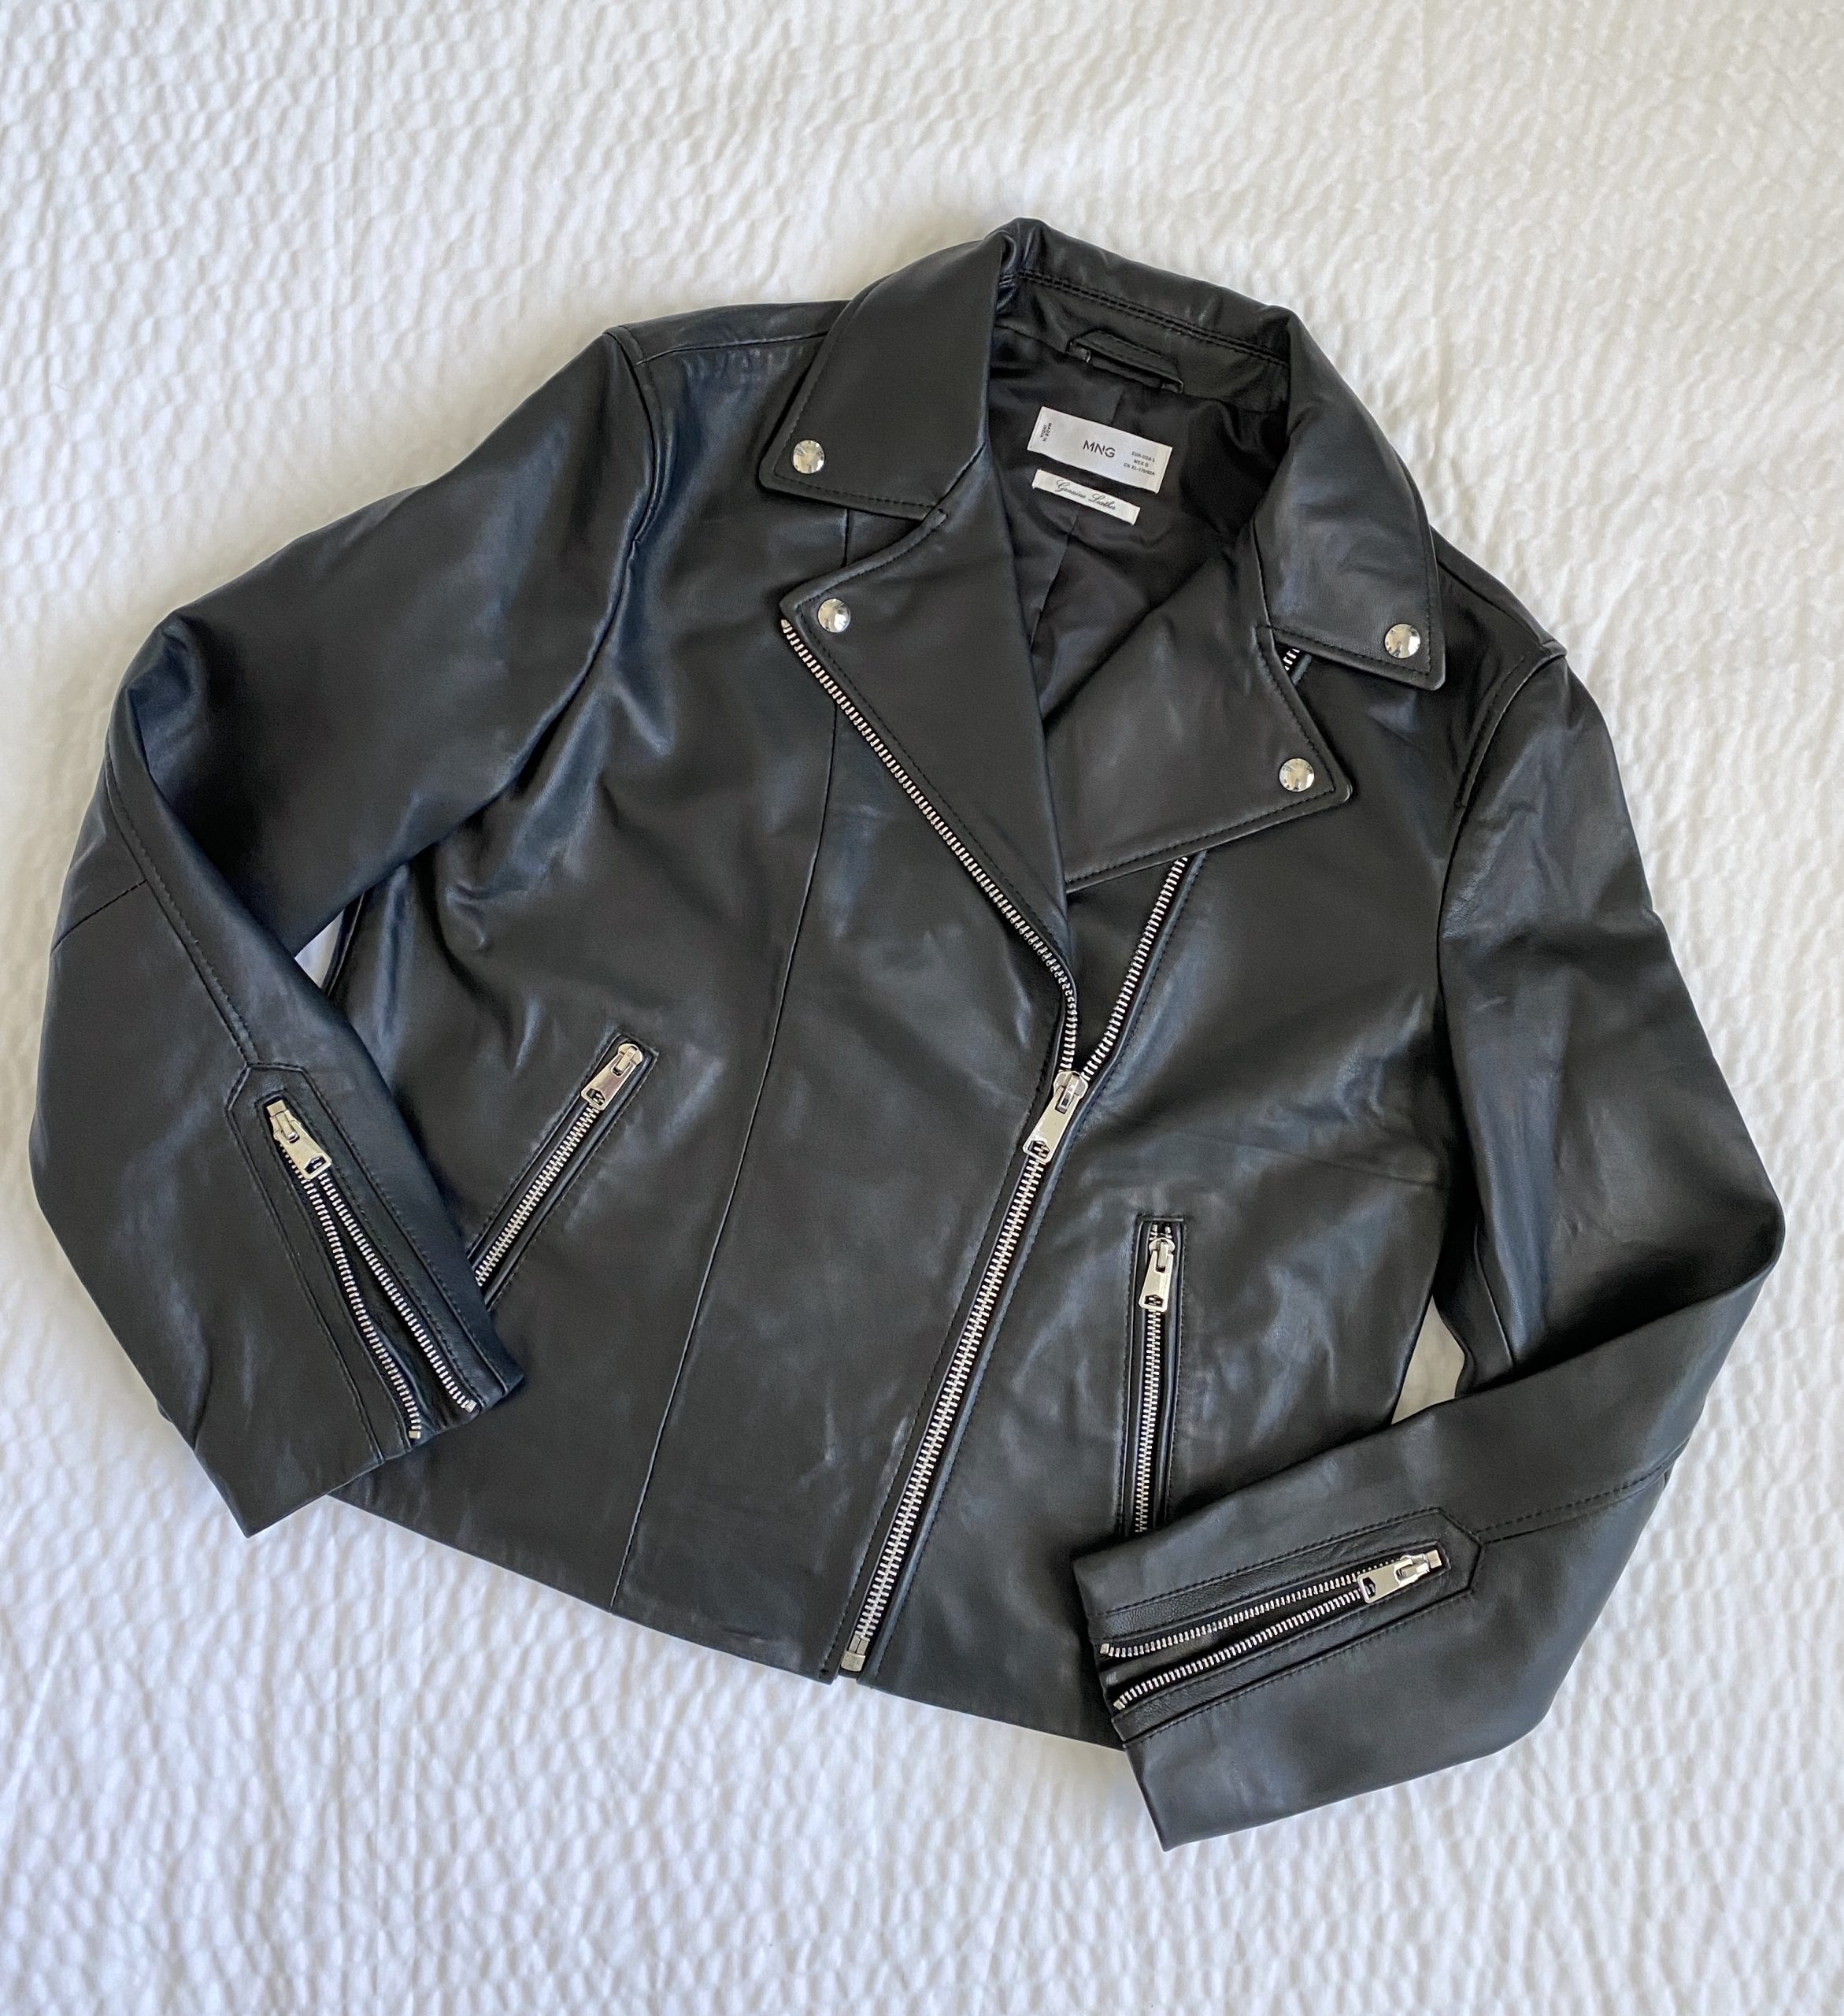 Try-On Review - Mango Leather Jacket - Classy Yet Trendy